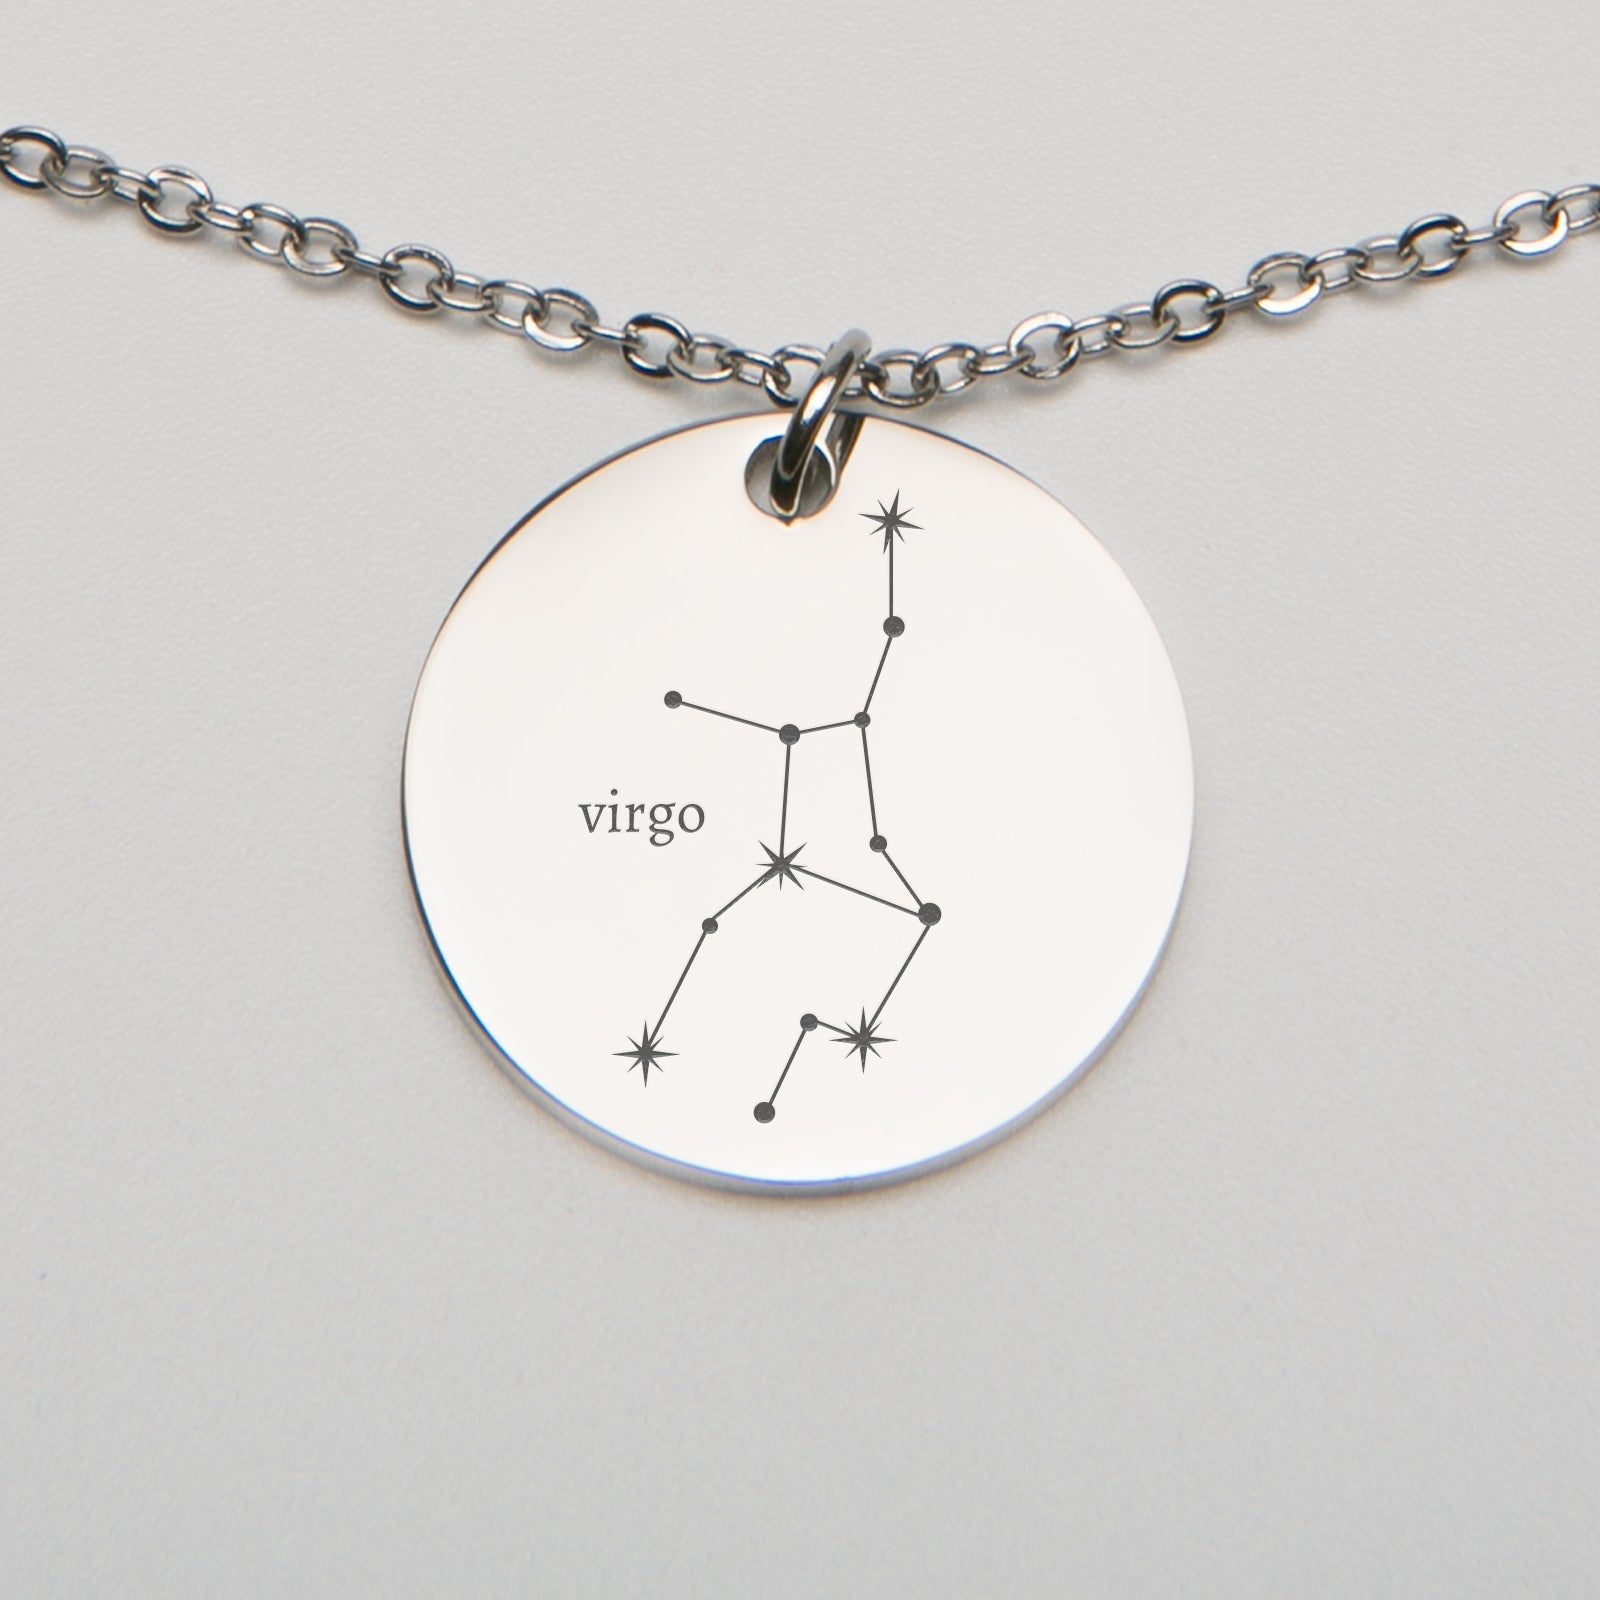 Personalized Round Necklace - Etchified-Etchified-